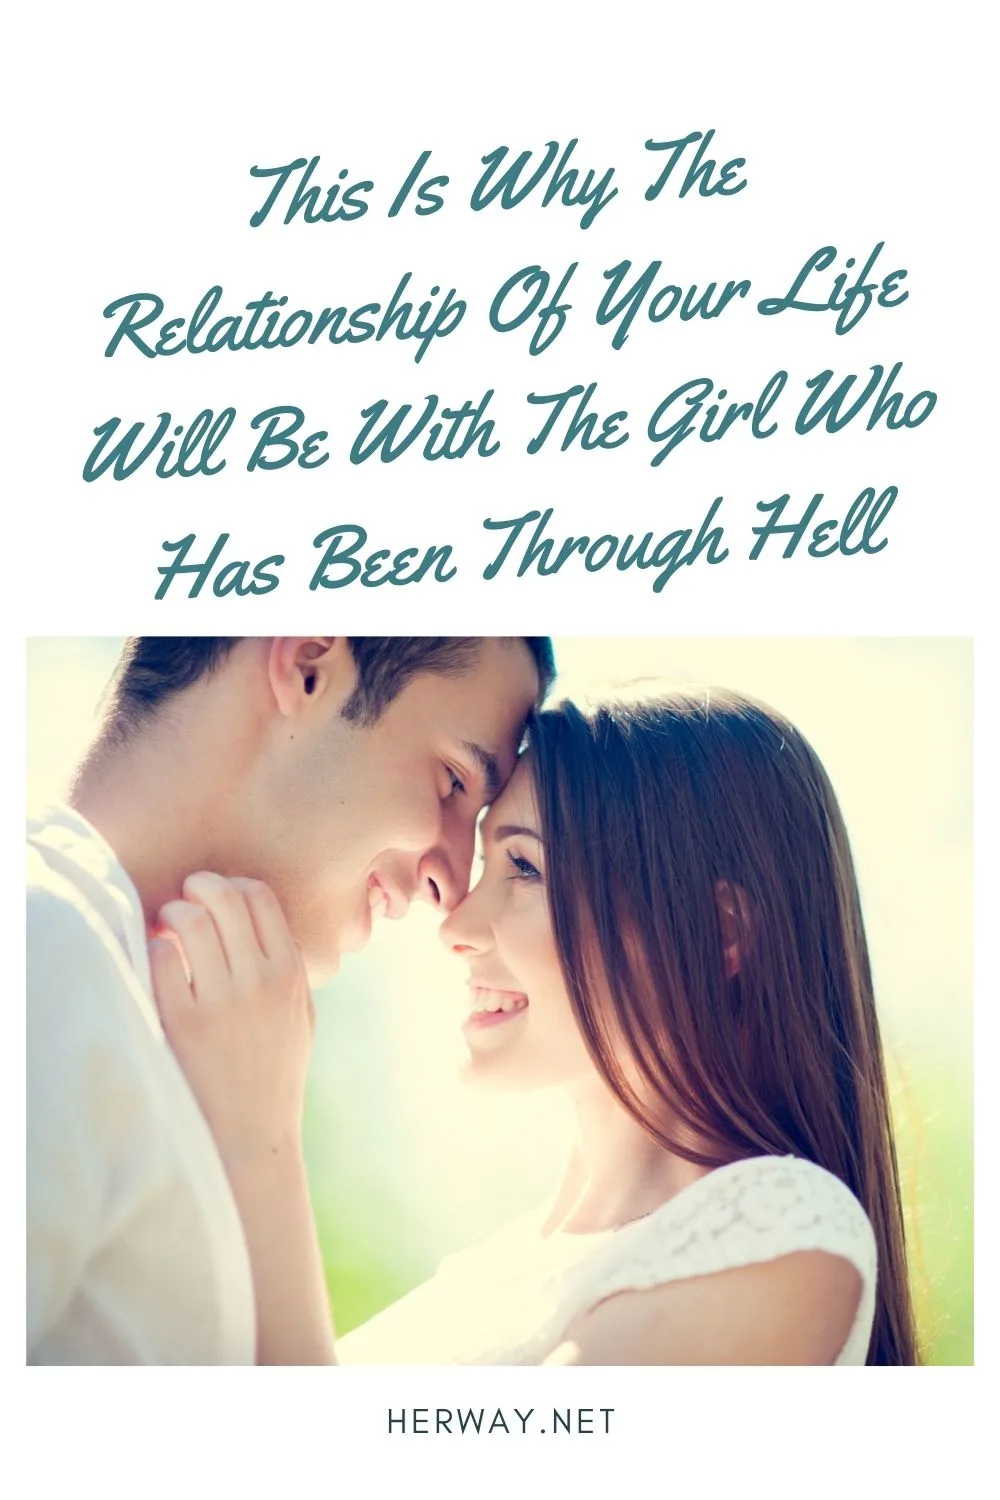 This Is Why The Relationship Of Your Life Will Be With The Girl Who Has Been Through Hell